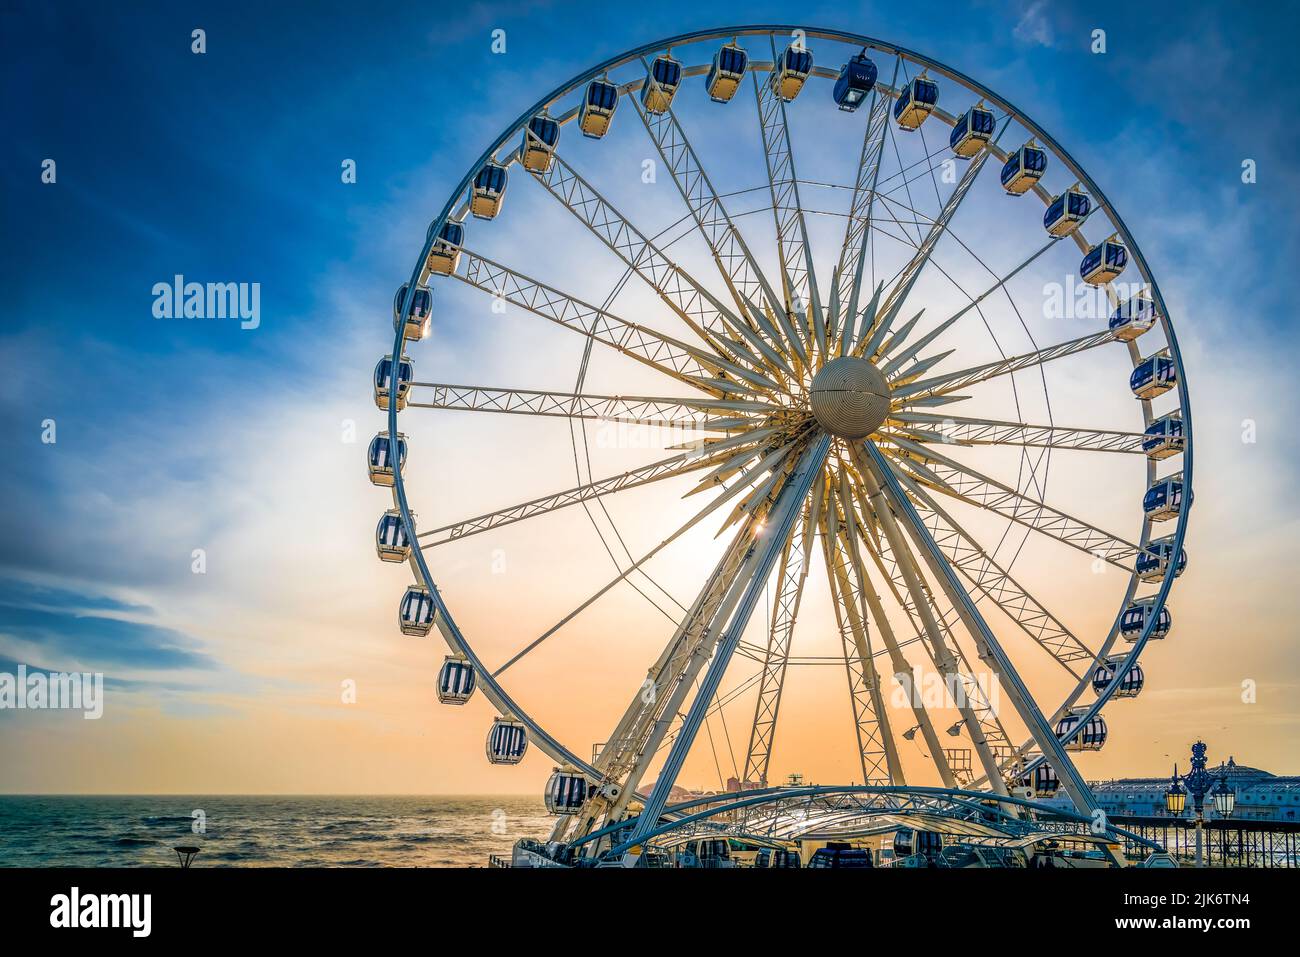 BRIGHTON, EAST SUSSEX, UK - JANUARY 27 : View of the ferris wheel in Brighton on January 27, 2013 Stock Photo